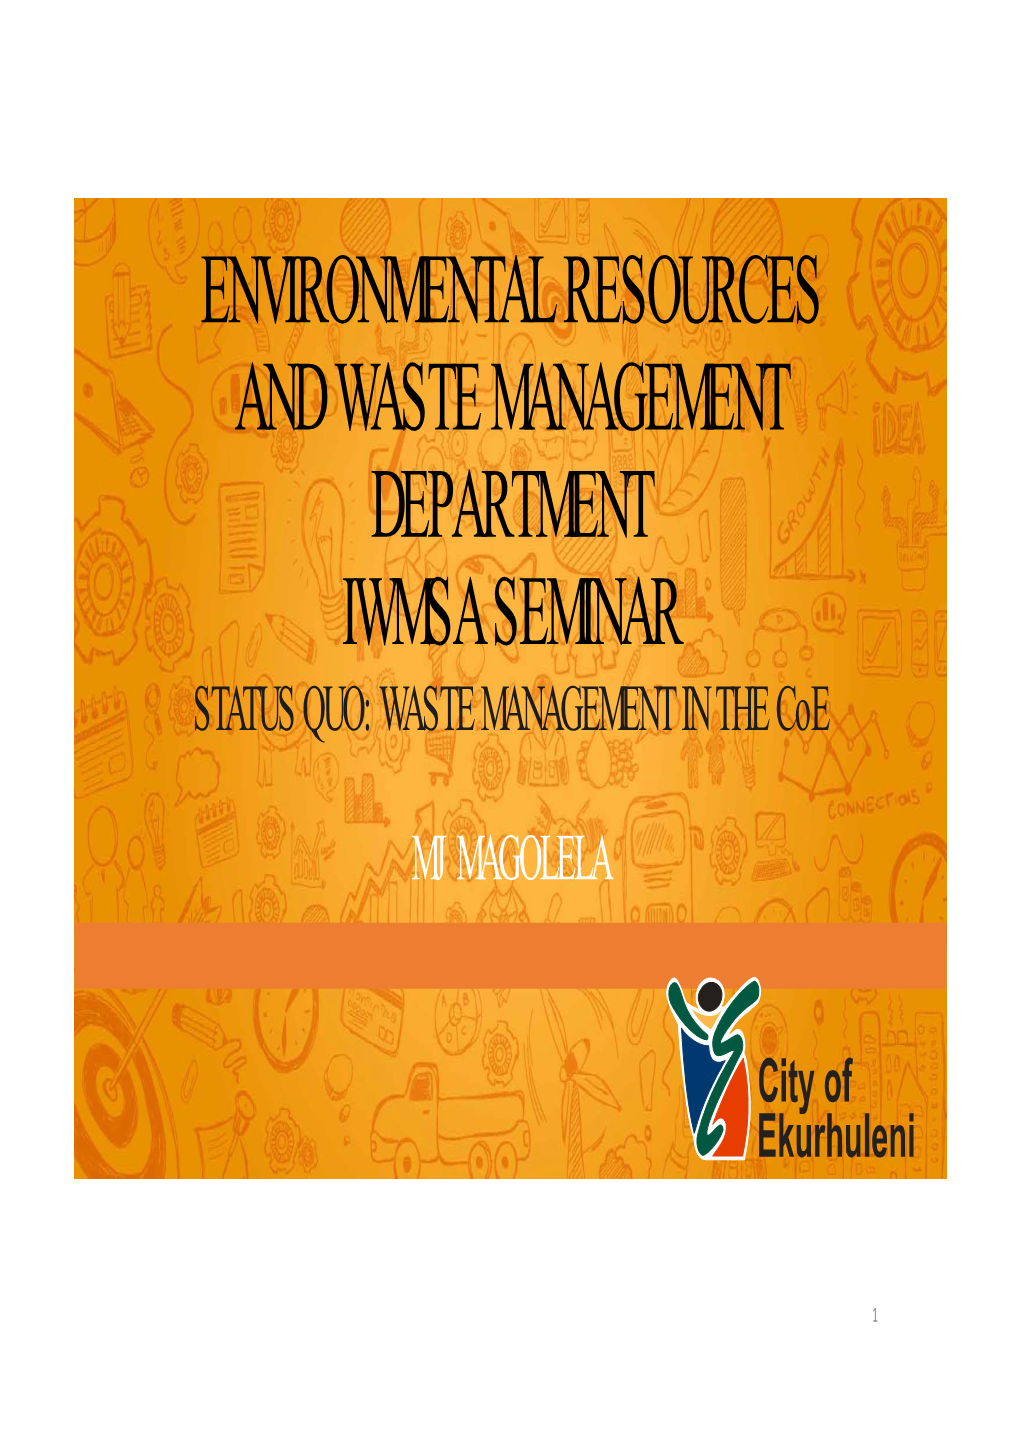 ENVIRONMENTAL RESOURCES and WASTE MANAGEMENT DEPARTMENT IWMSA SEMINAR STATUS QUO: WASTE MANAGEMENT in the Coe